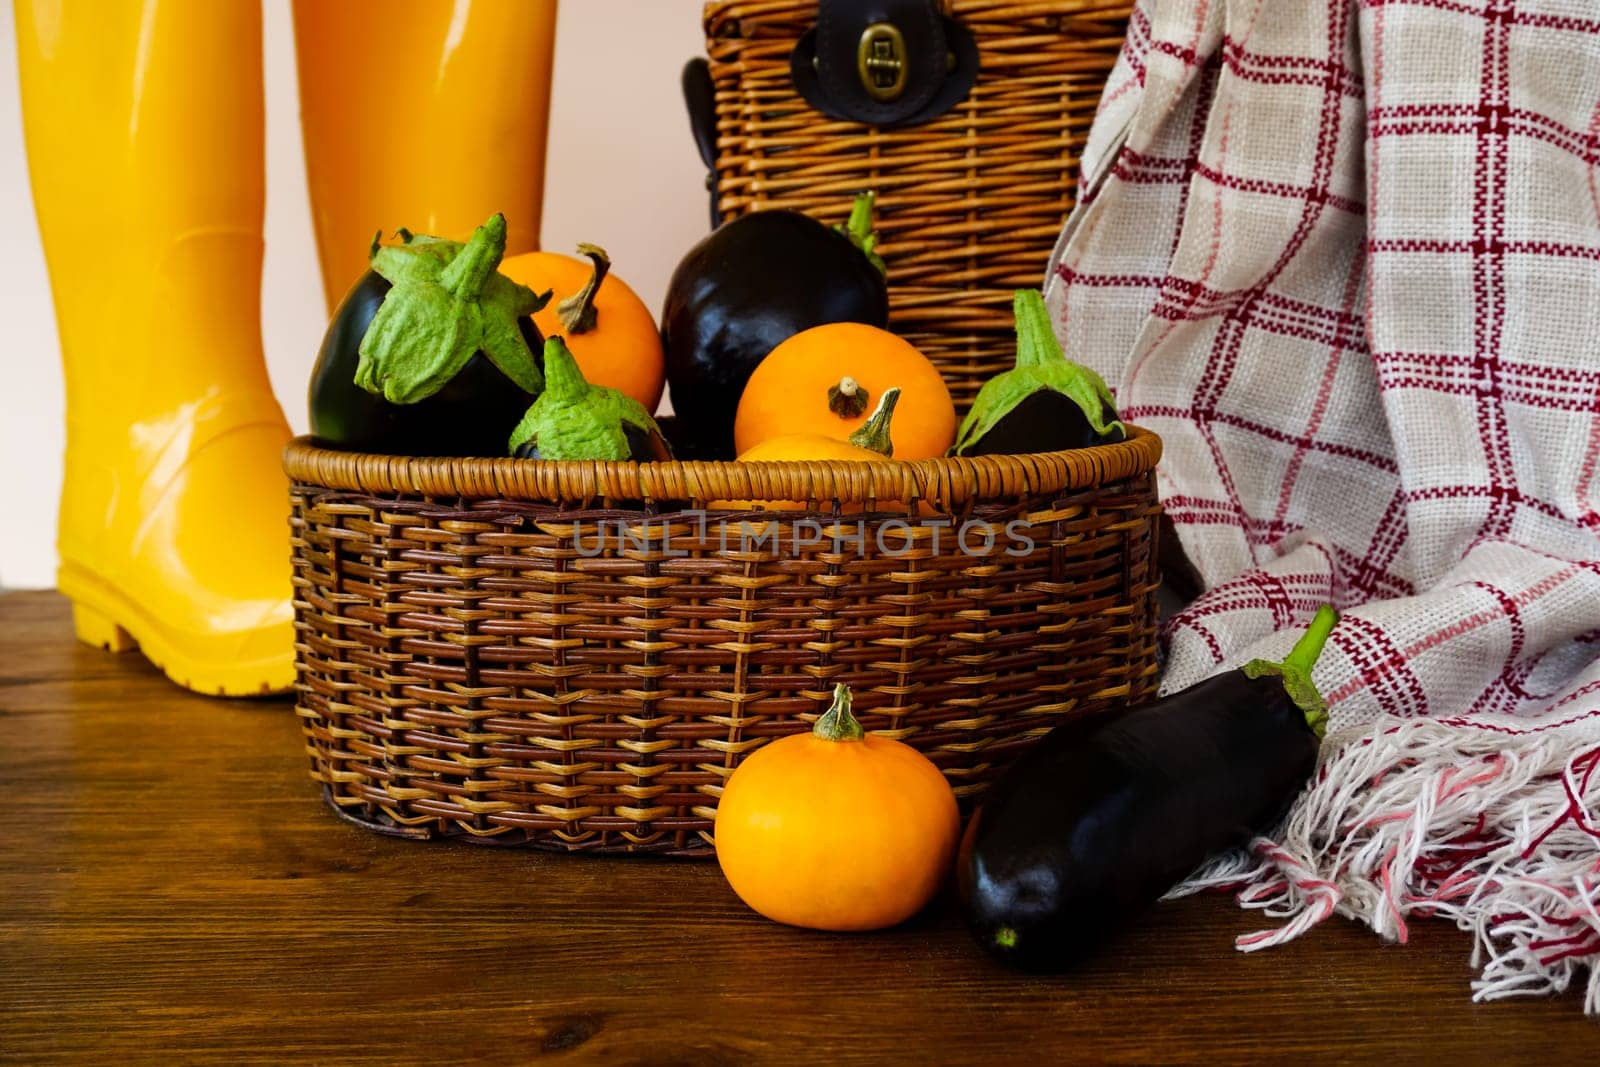 A basket with eggplants and pumpkins is on the table, and in the background there is a wicker basket and yellow rubber boots.